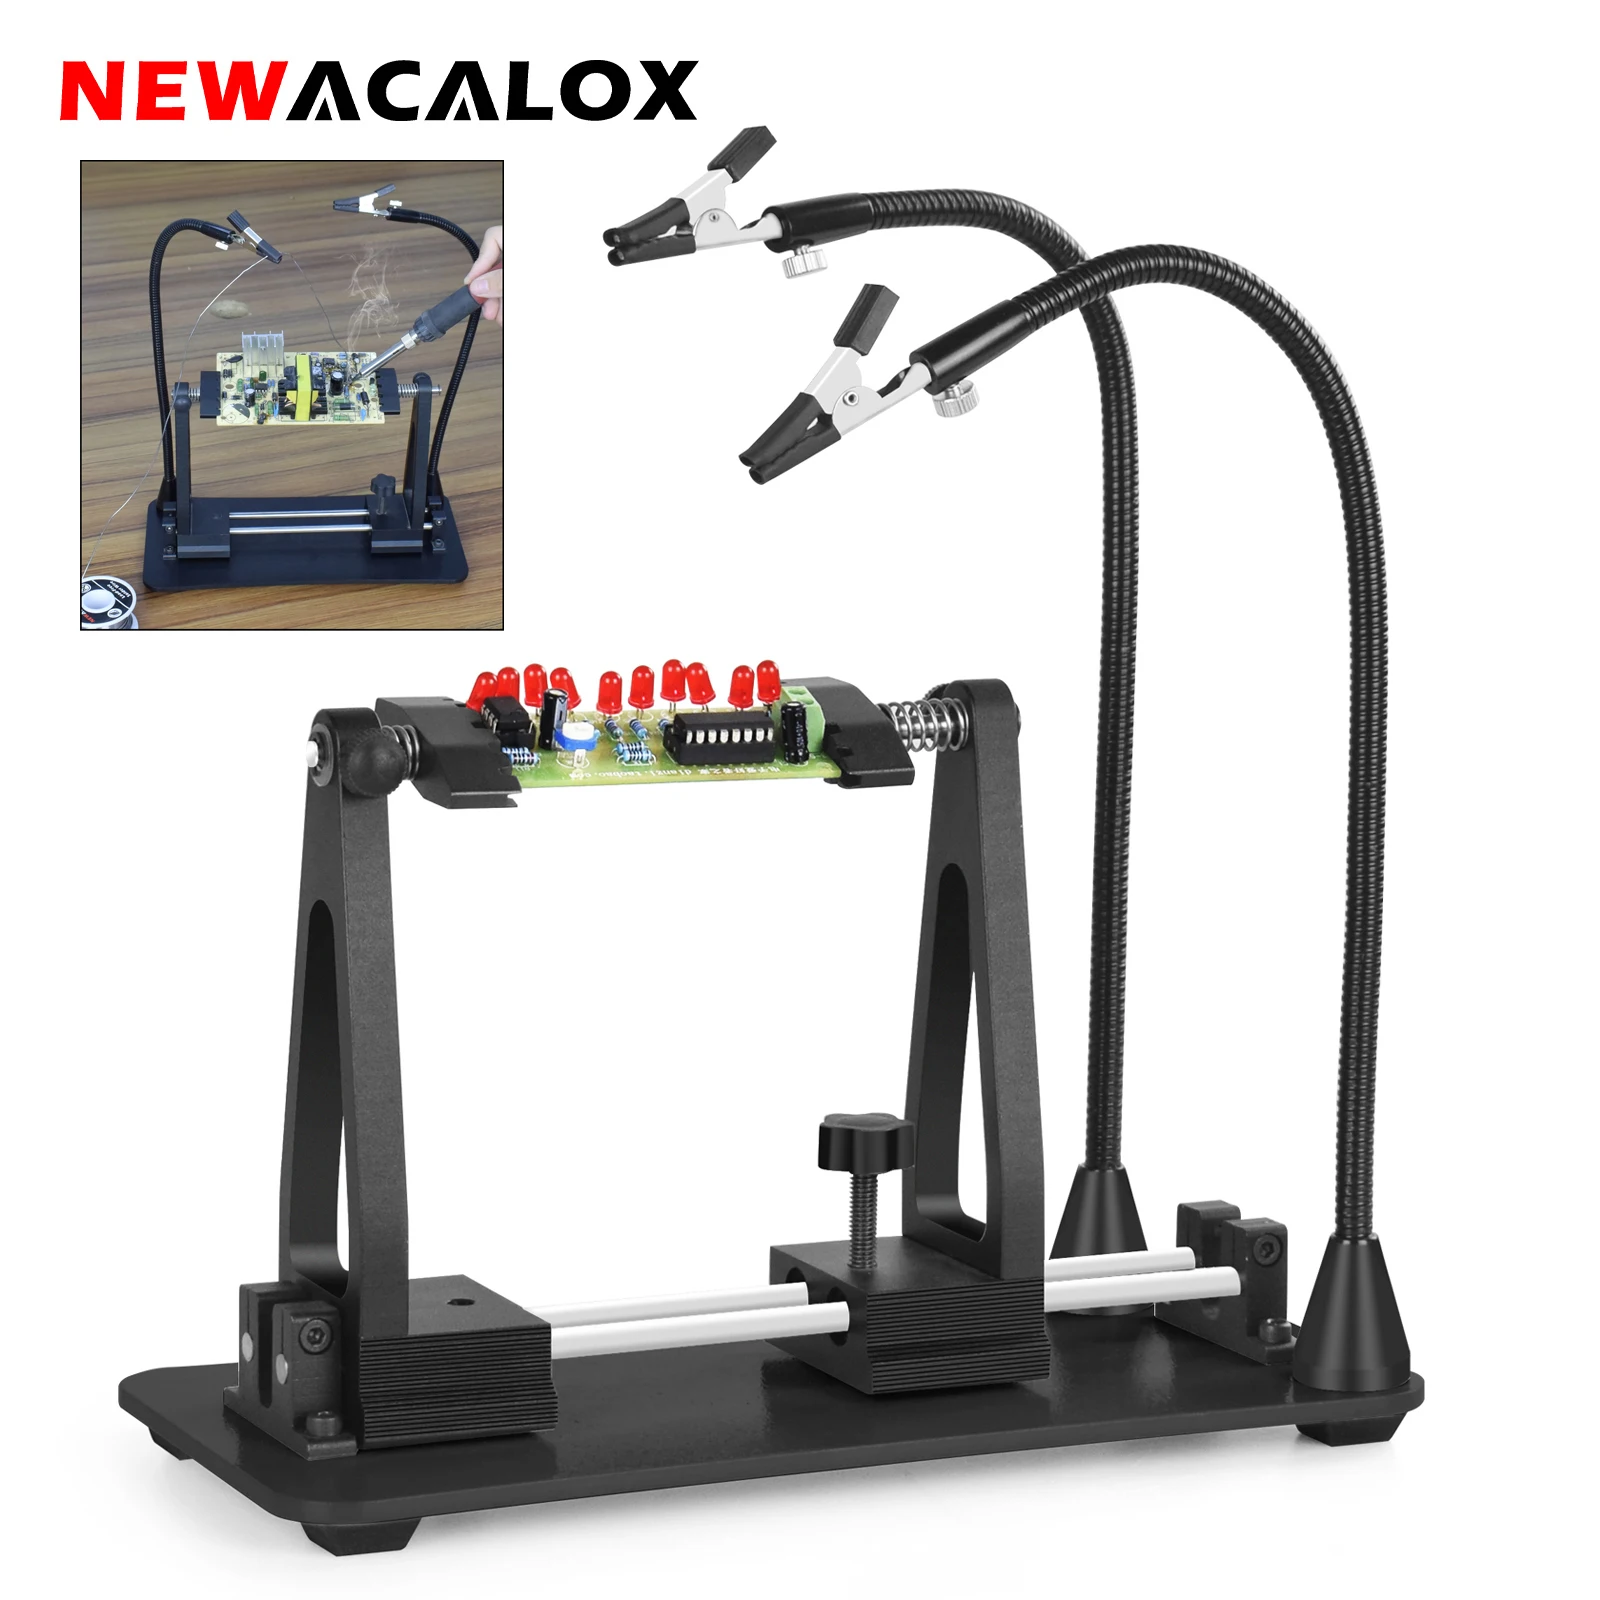 NEWACALOX 360° Adjustable PCB Holder with 2Pcs Magnetic Flexible Soldering Third Hand Welding Repair Helping Hands Station newacalox multi soldering helping hands third hand tool with 4pcs flexible arms soldeirng station holder for pcb welding repair